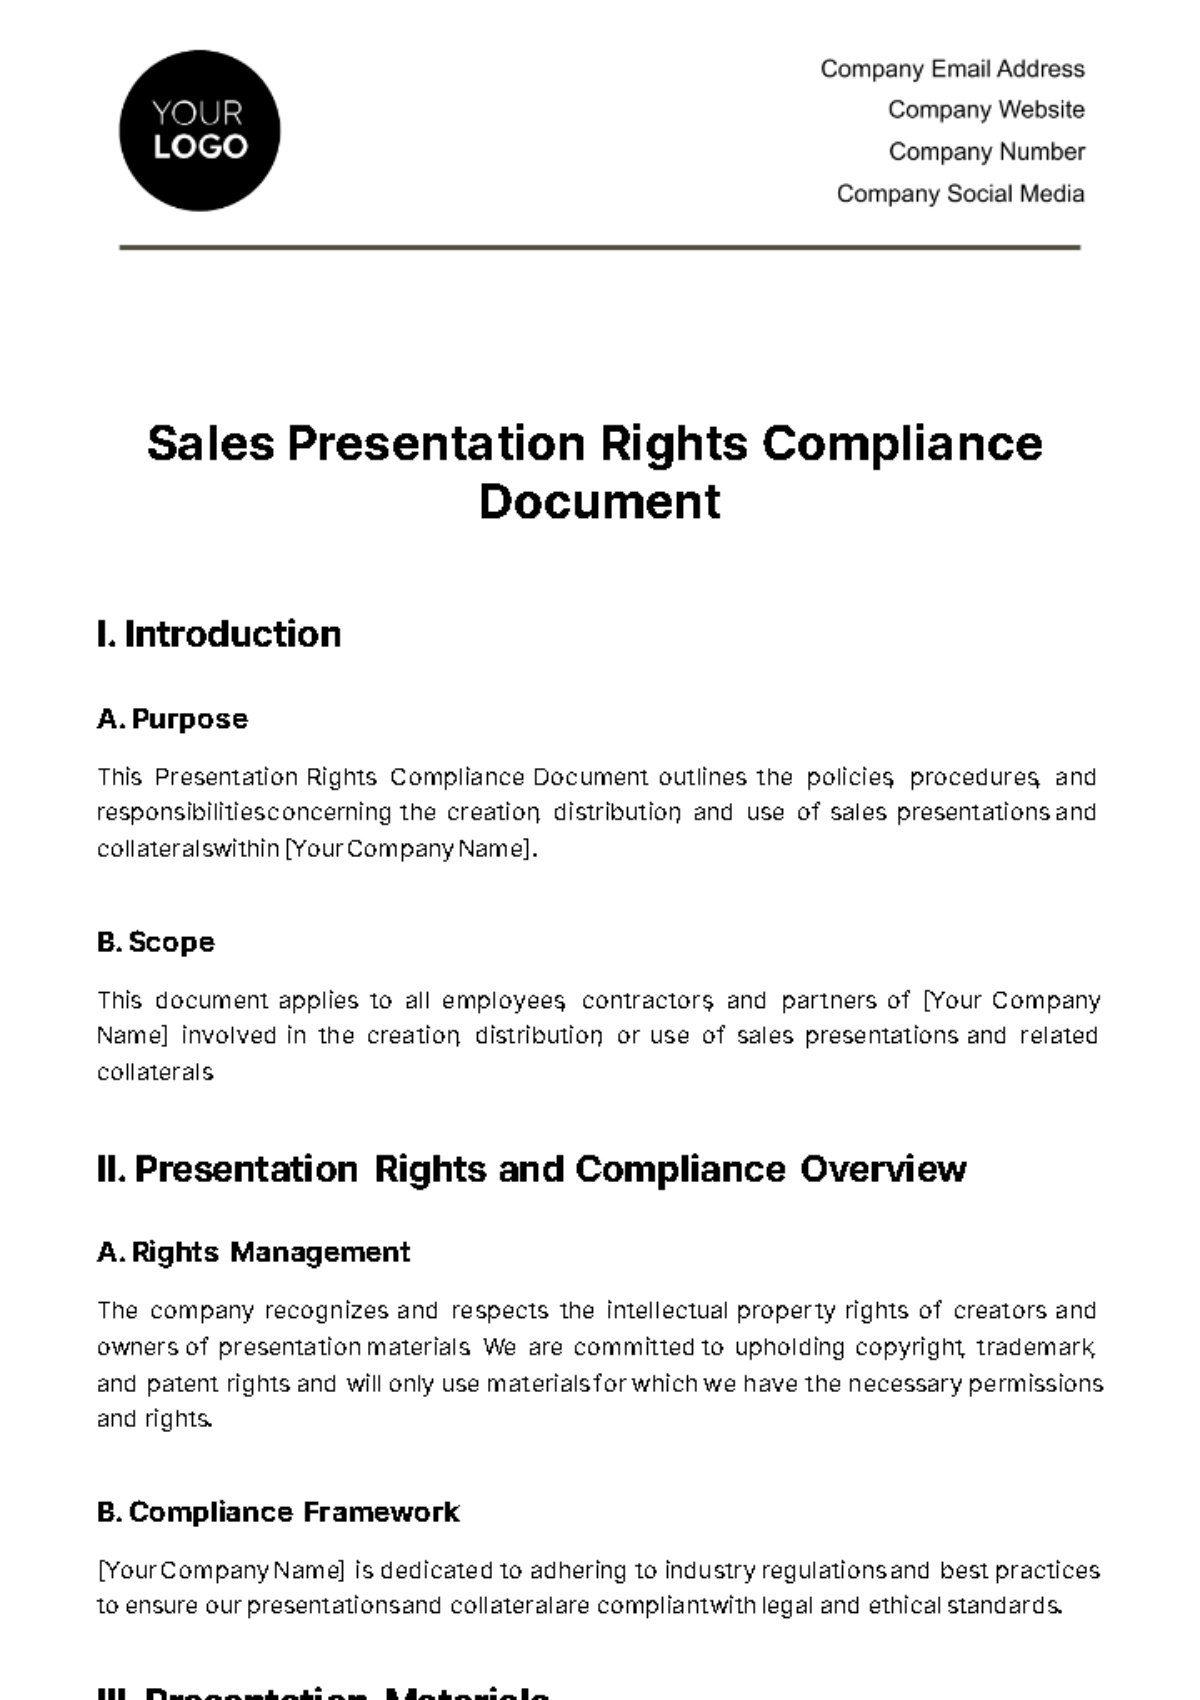 Free Sales Presentation Rights Compliance Document Template